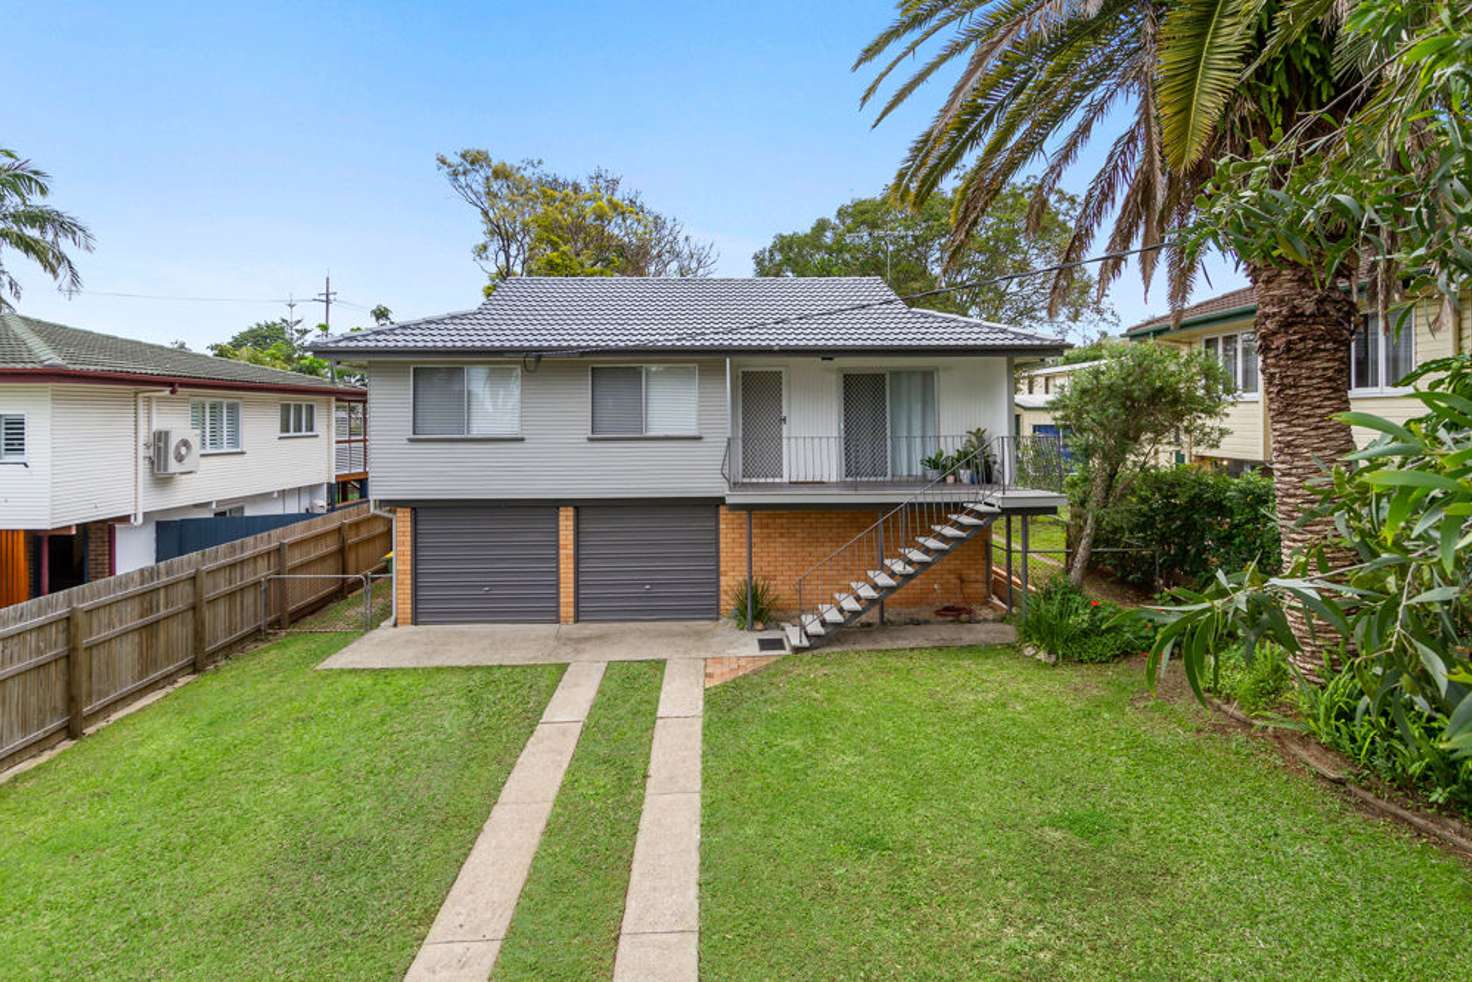 Main view of Homely house listing, 13 Cawdor Street, Arana Hills QLD 4054